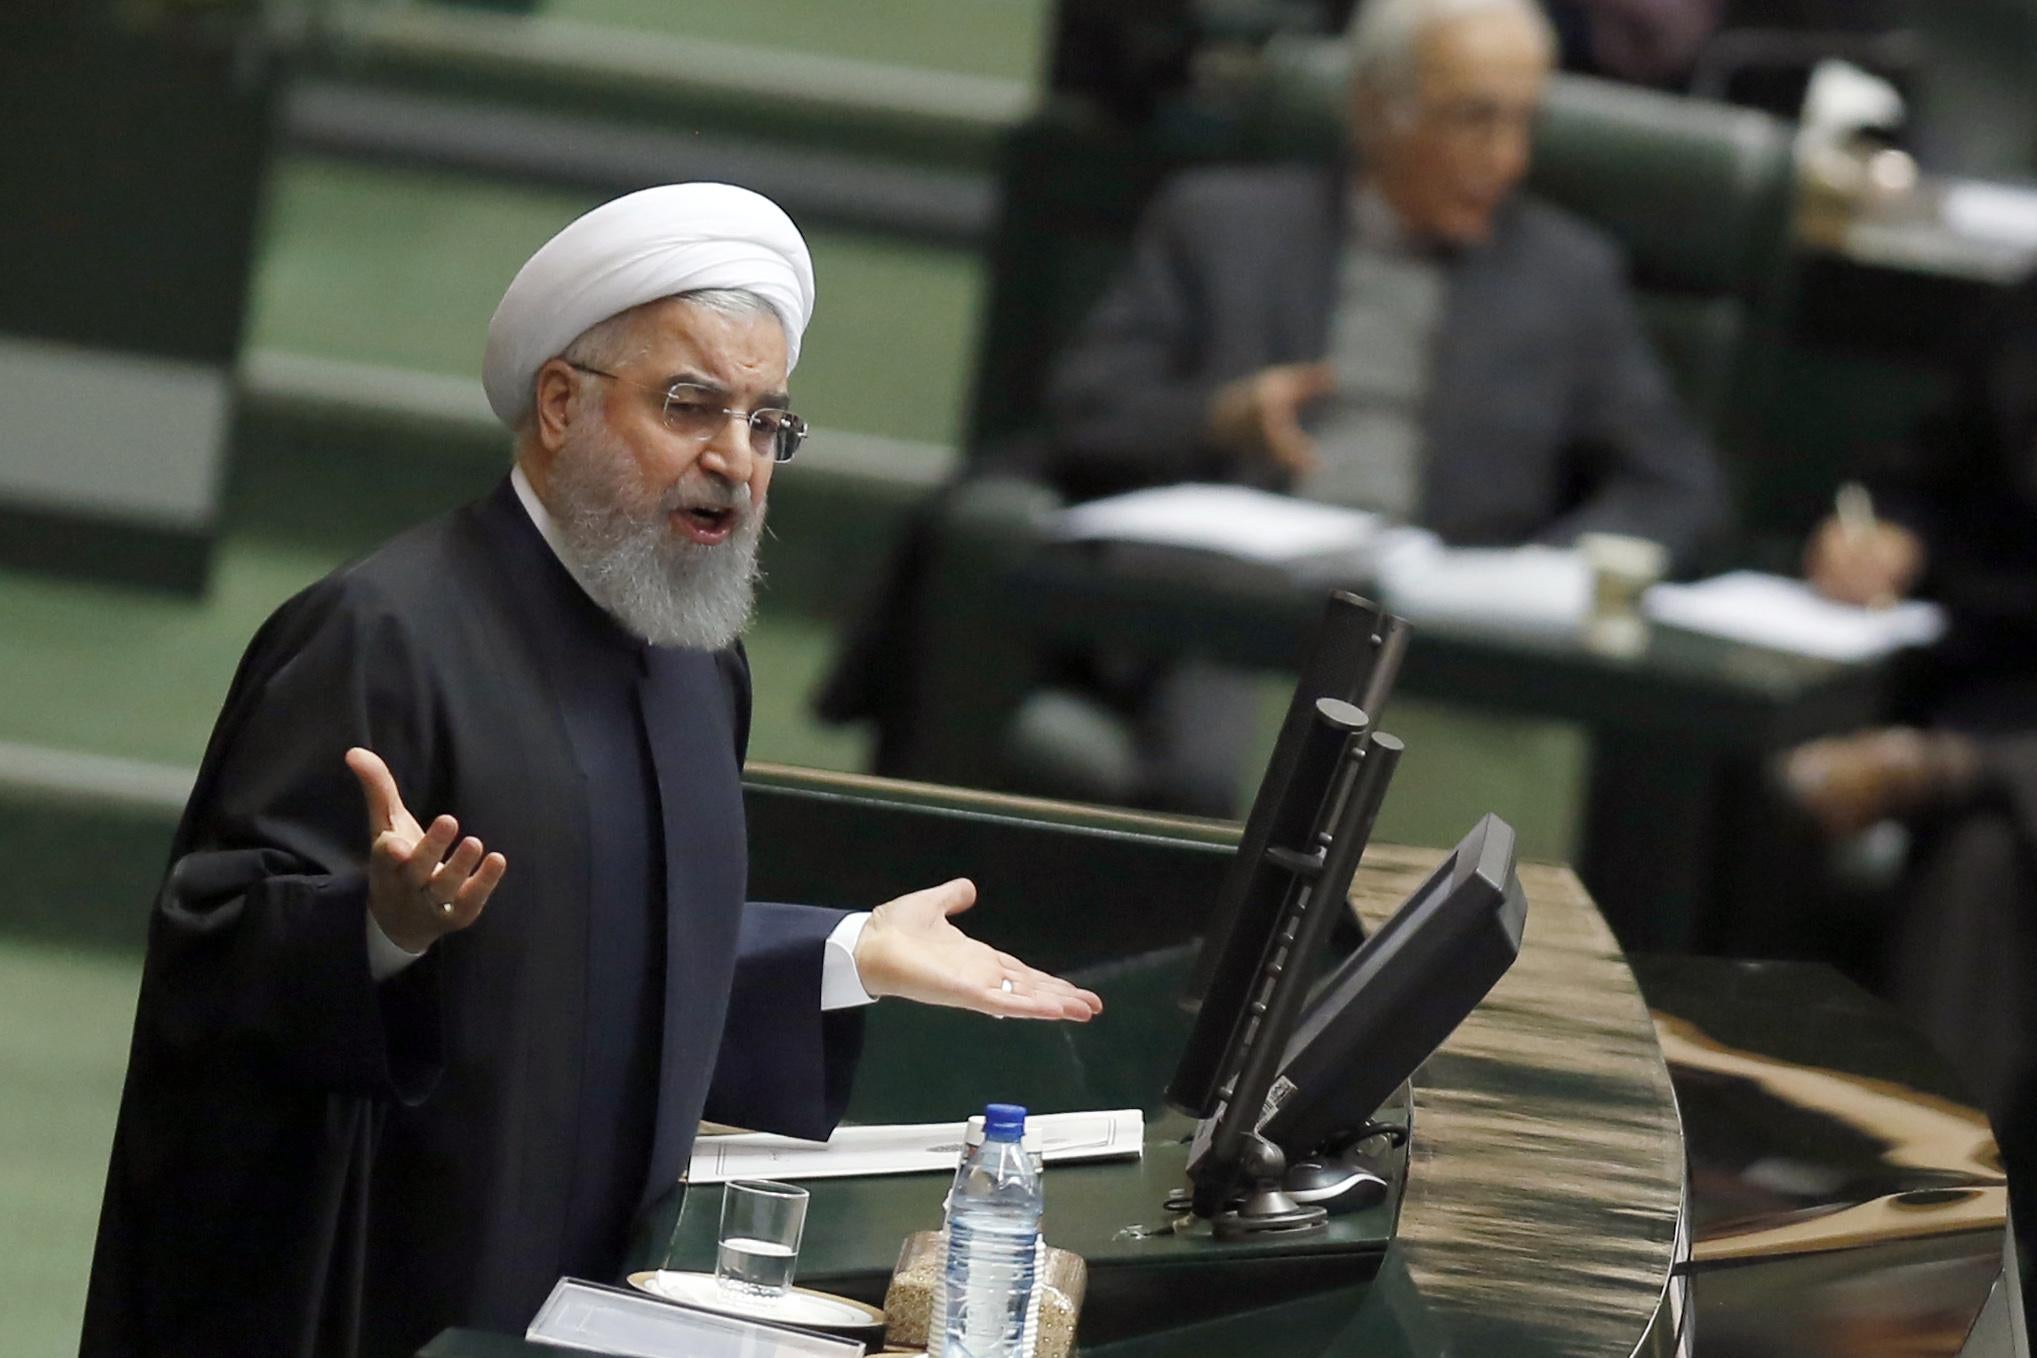 Iran's President Hassan Rouhani presents to the parliament his budget for 2018-2019 on December 10, 2017, in Tehran. / AFP PHOTO / ATTA KENARE        (Photo credit should read ATTA KENARE/AFP/Getty Images)